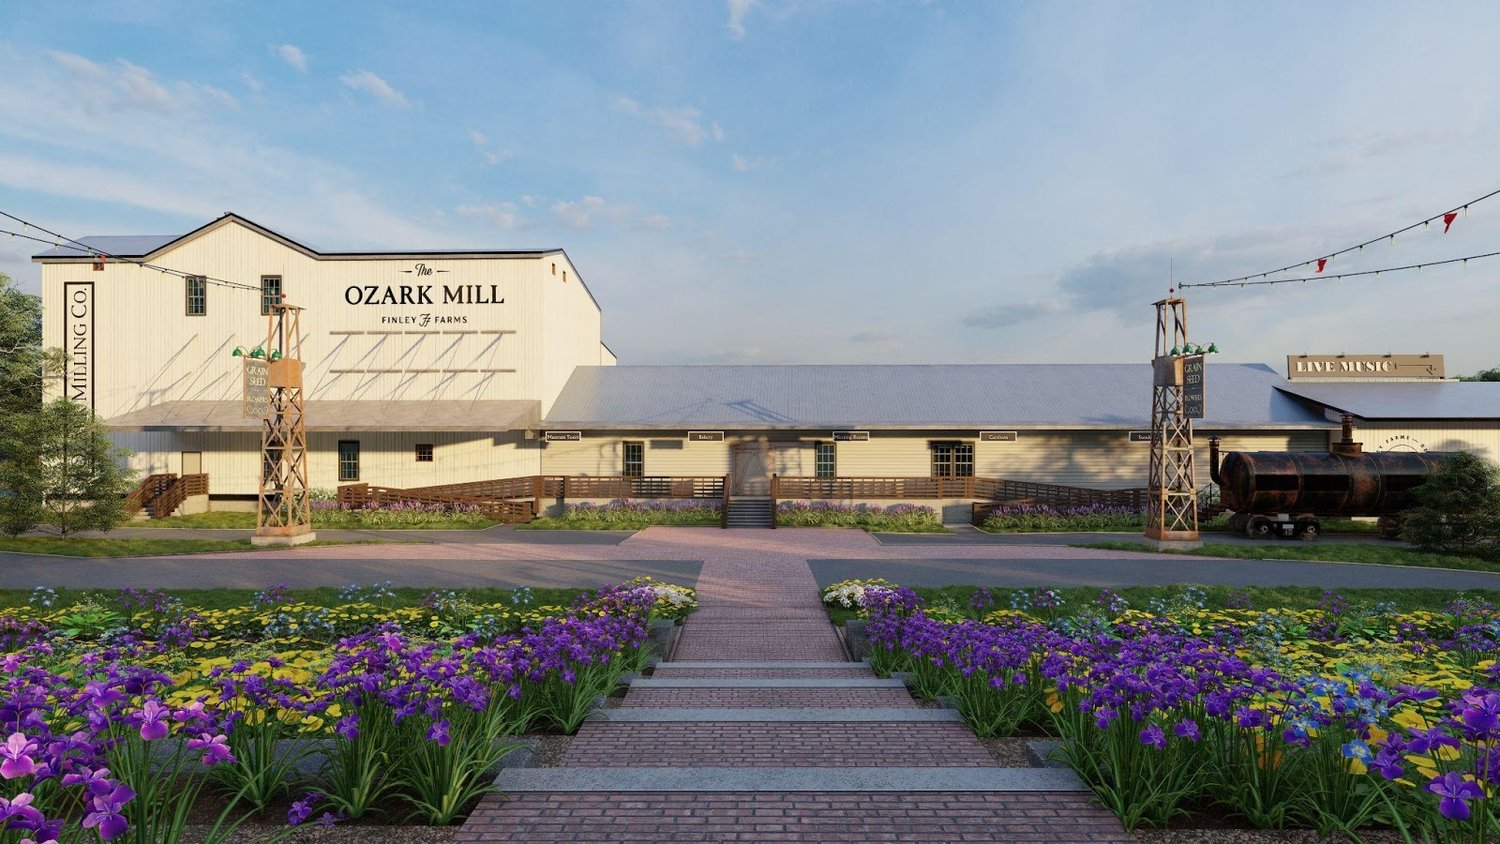 The Ozark Mill is being redeveloped into a restaurant and event space.